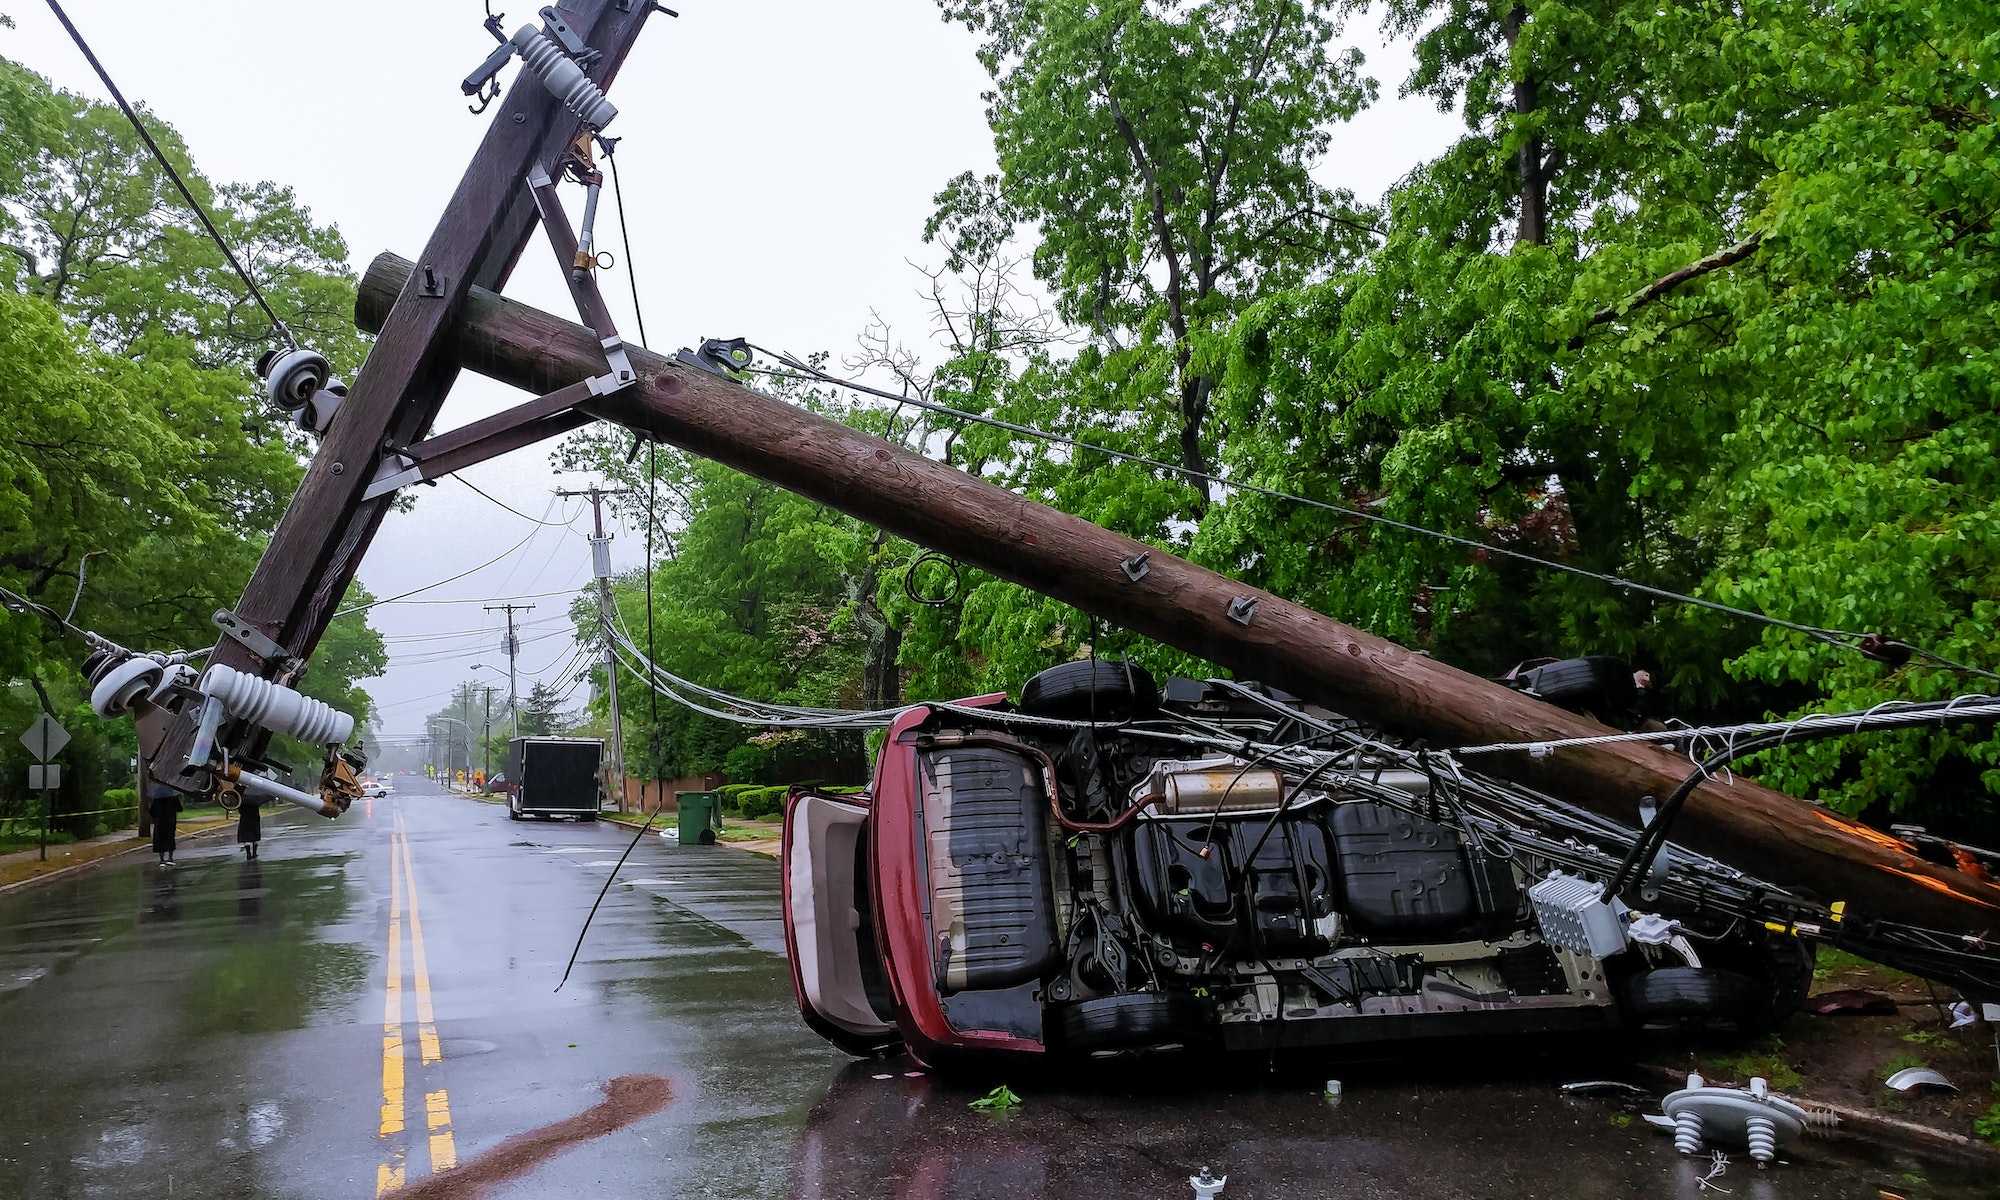 Car turned over after accident with crash electric pole after a severe storm